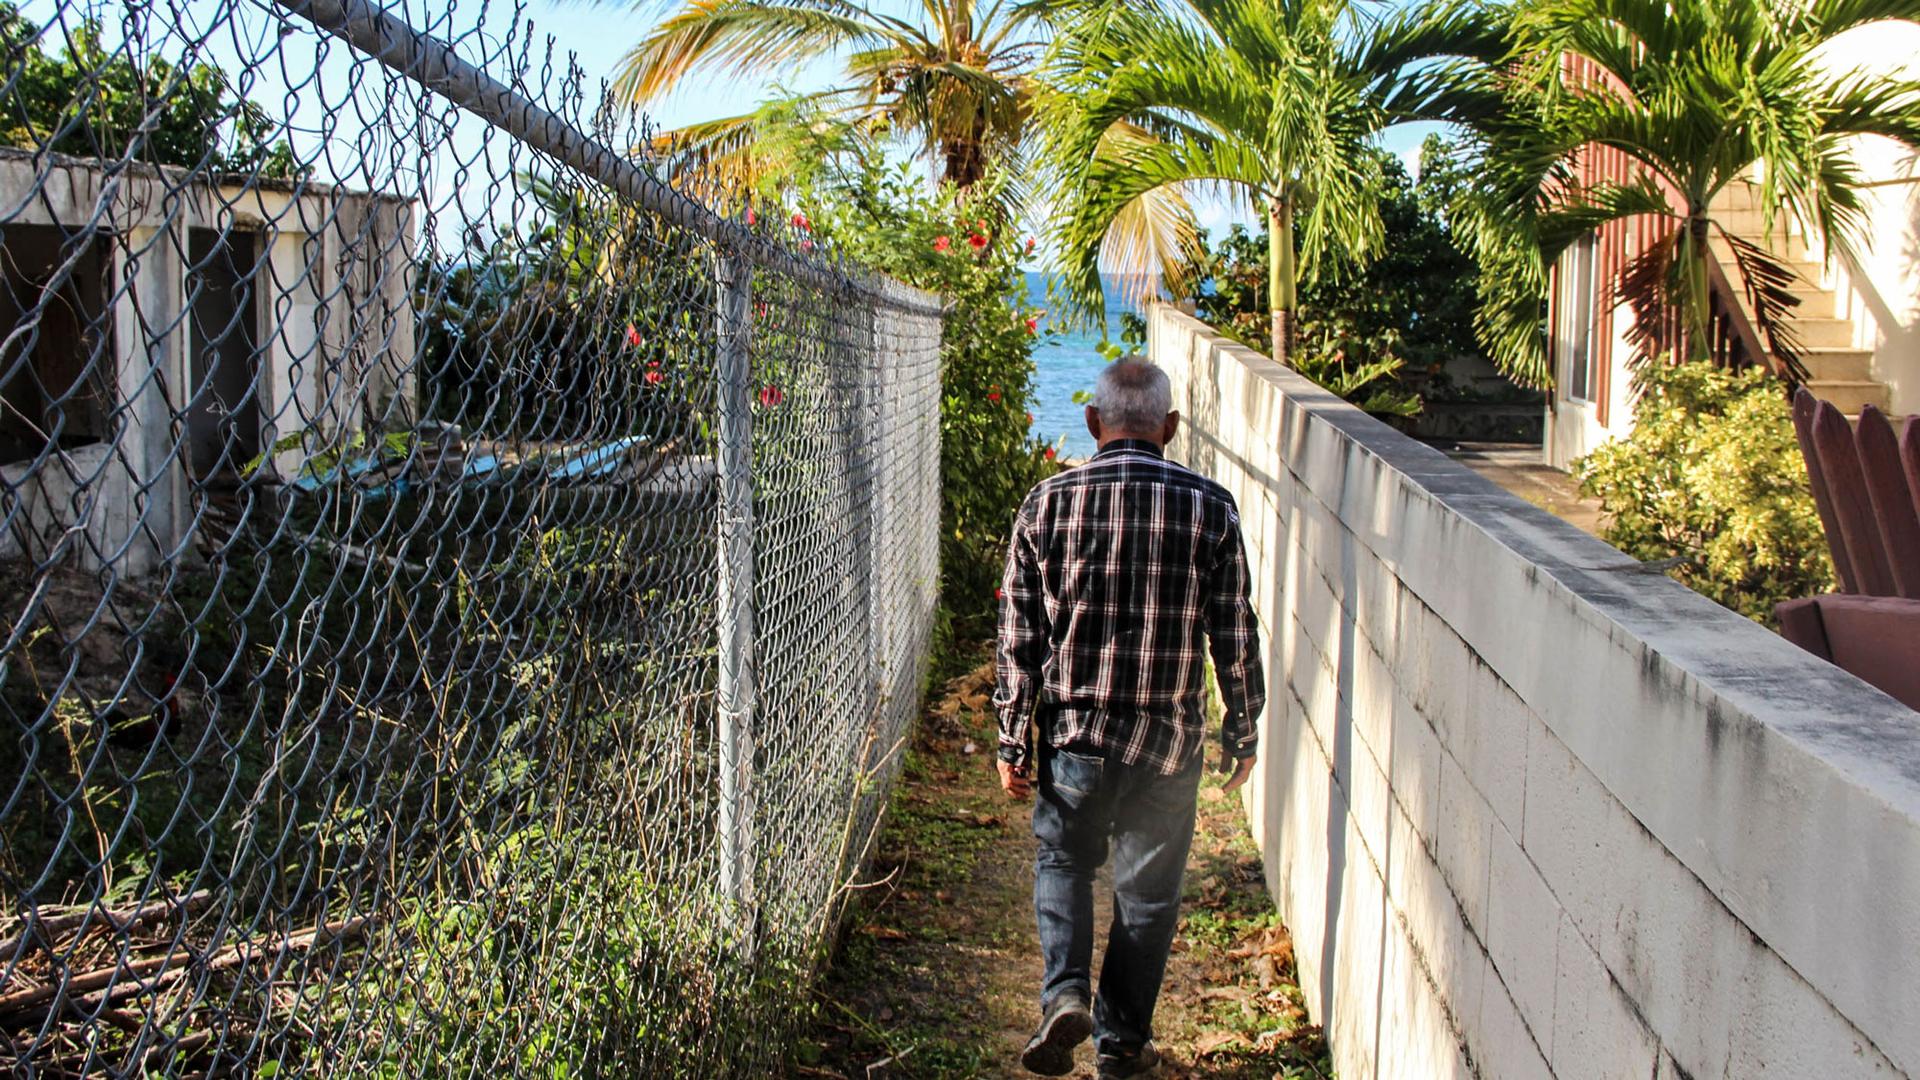 A man is shown walking between two houses with a chain link fence on his left and a manicured stone wall on his right.